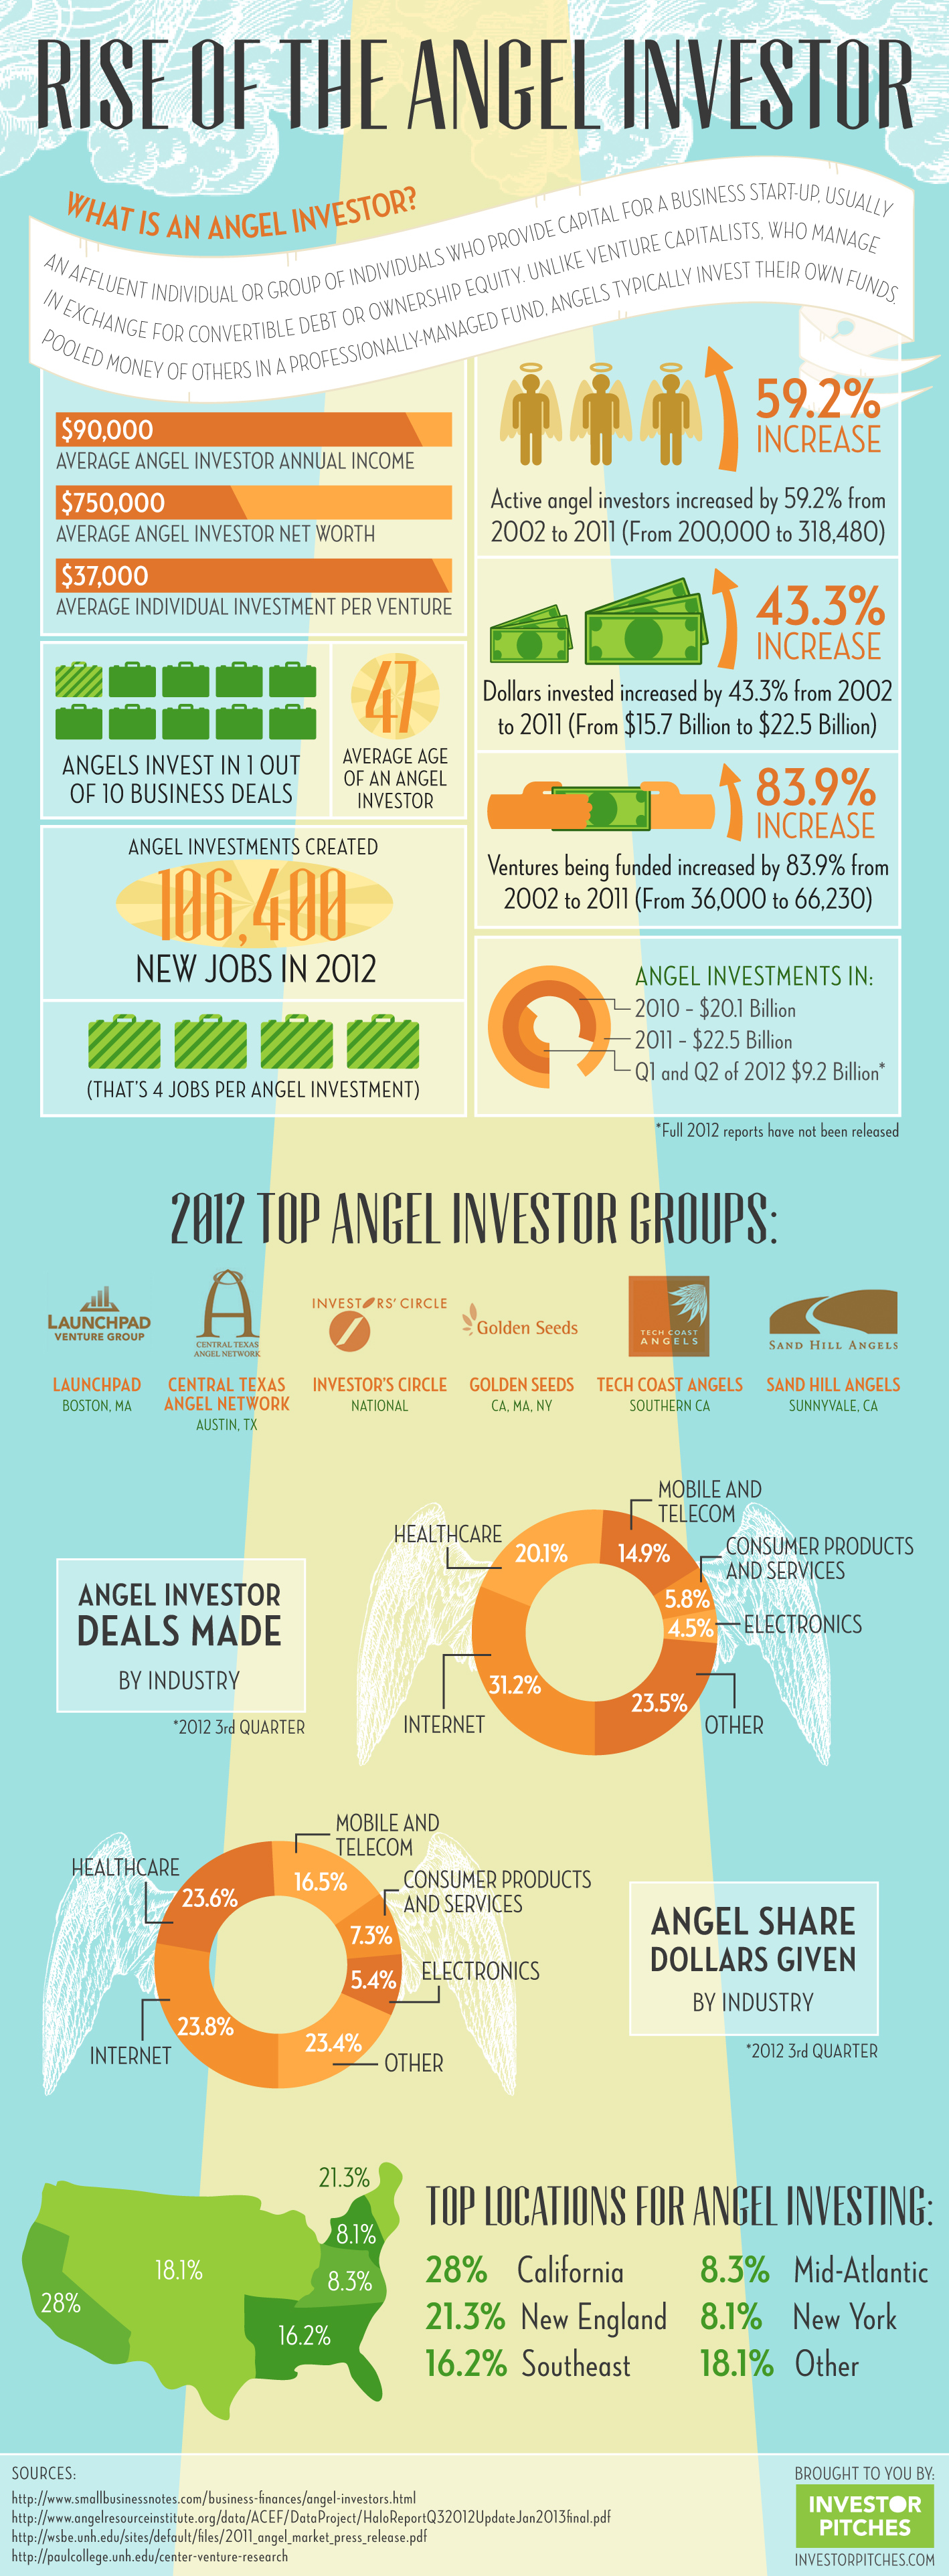 Rise of the Angel Investor